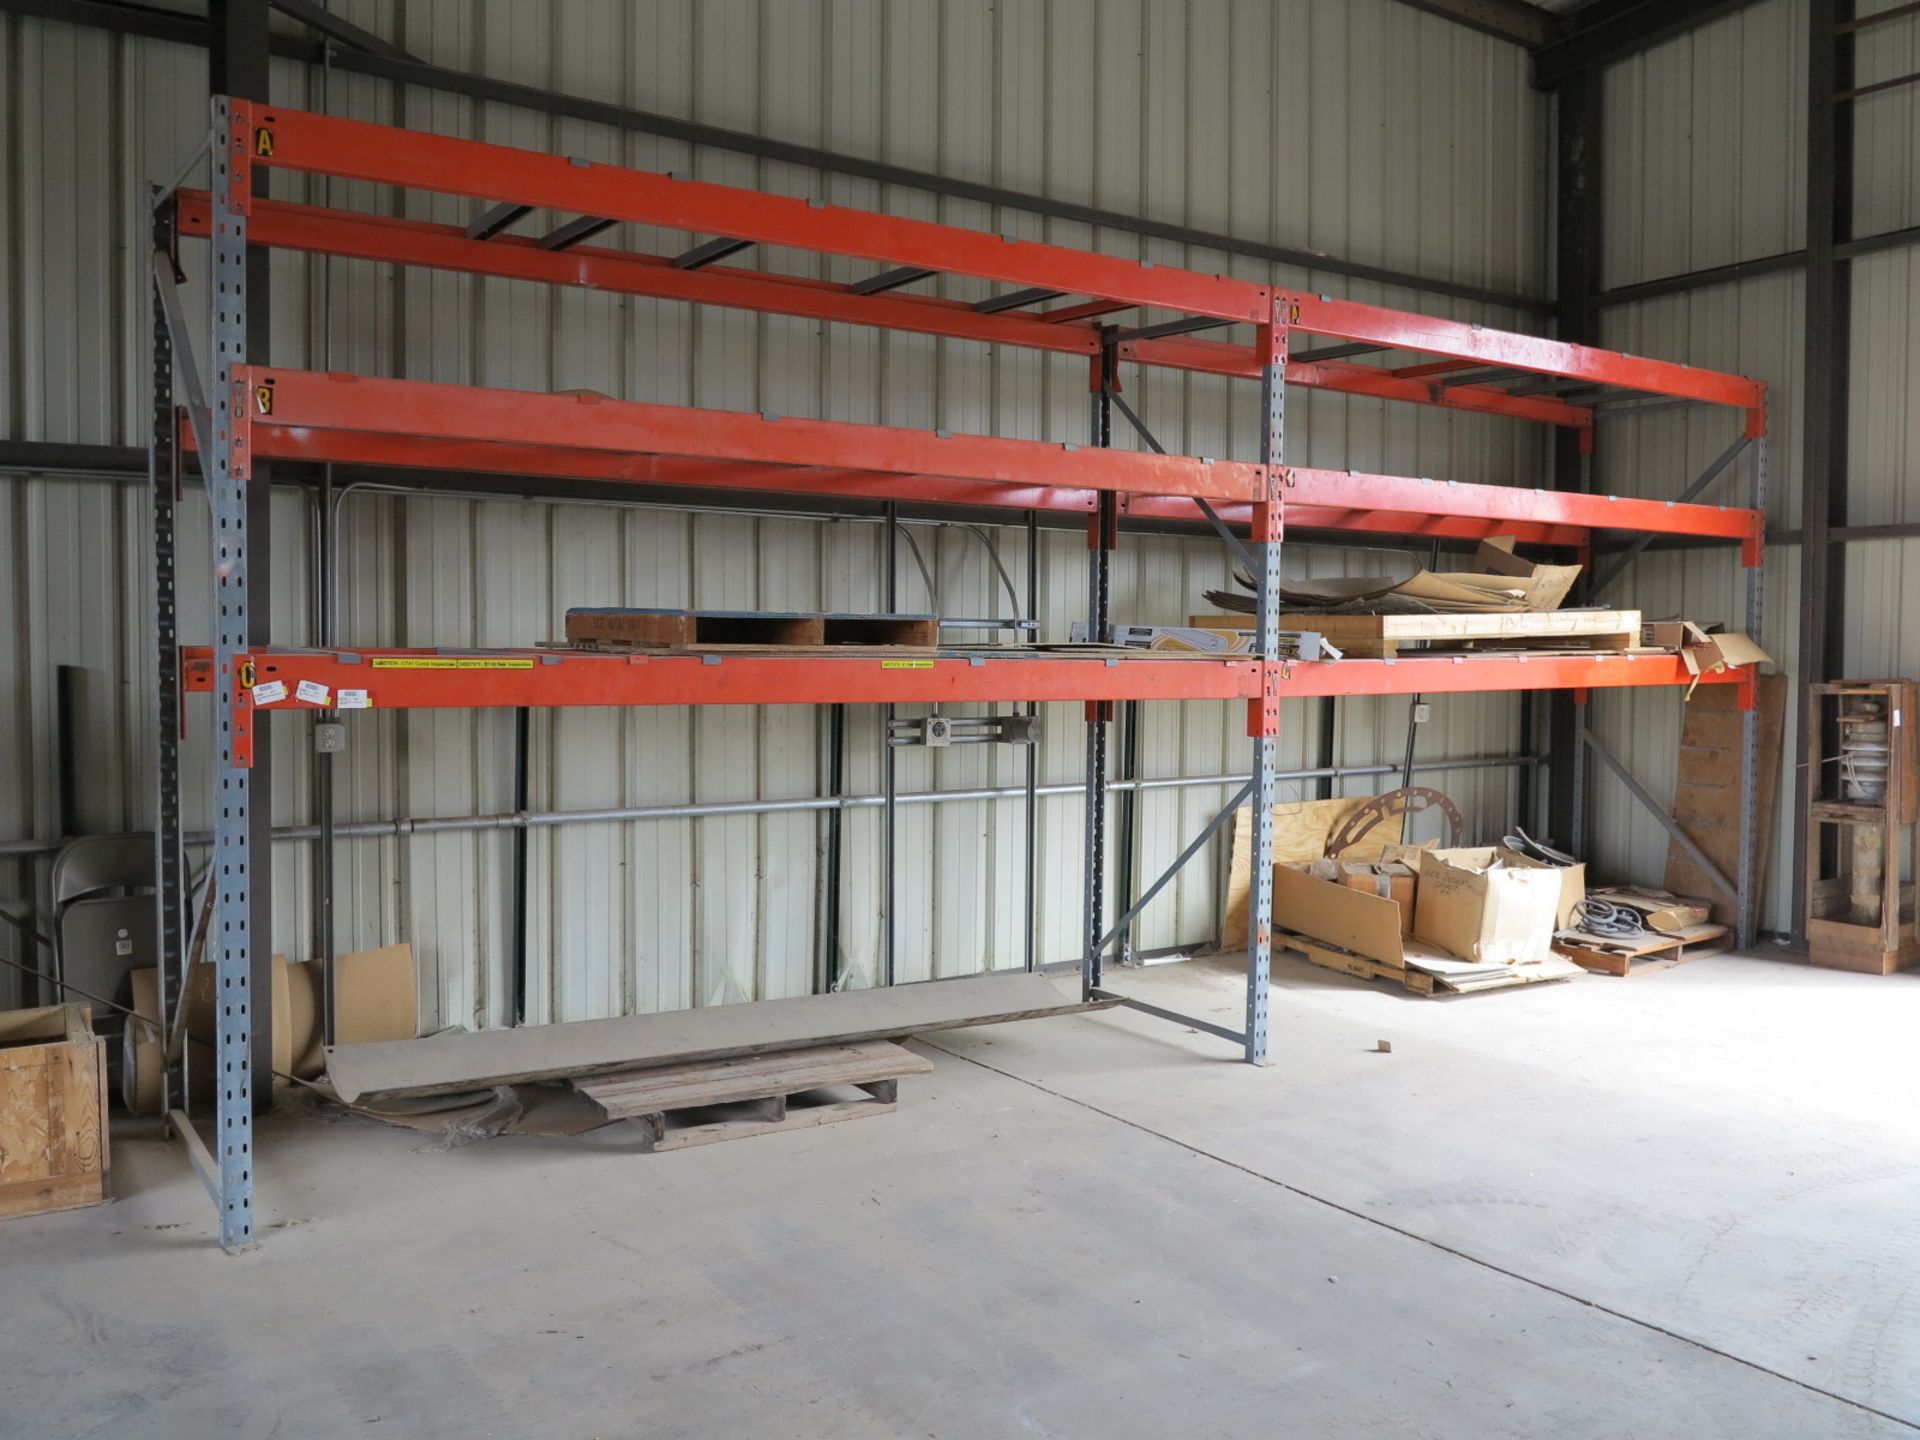 LOT - (5) SECTIONS OF PALLET RACK, 12' BEAMS, 10' UPRIGHTS, CONTENTS NOT INCLUDED - Image 2 of 2